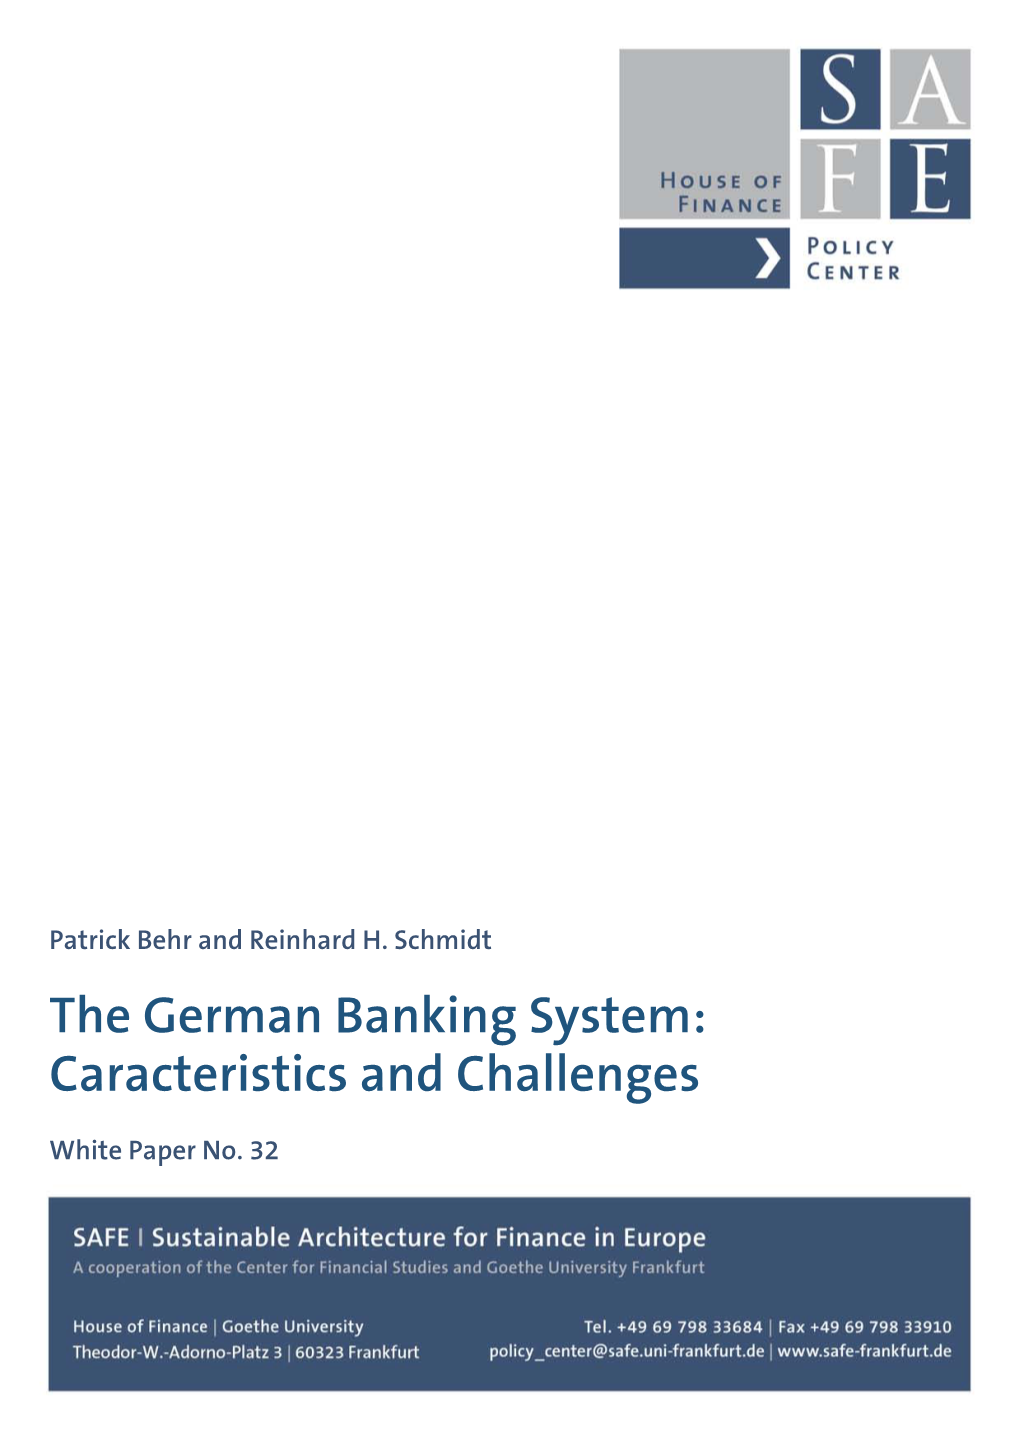 The German Banking System: Caracteristics and Challenges